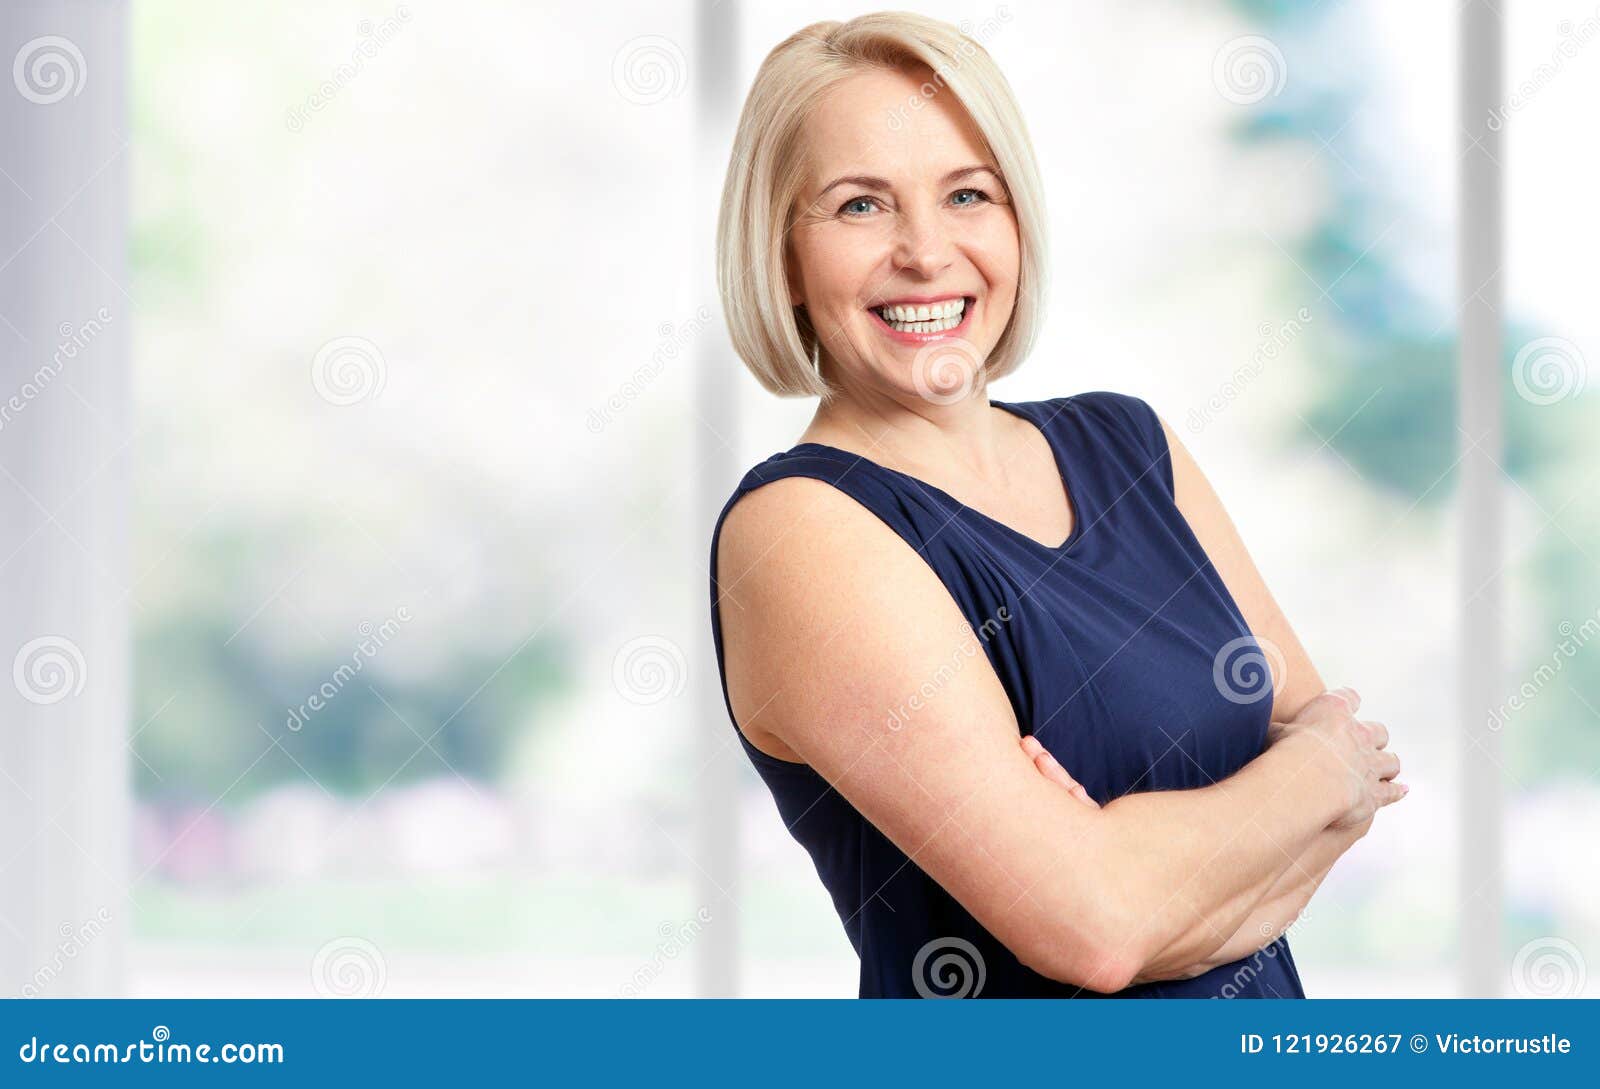 attractive middle aged woman with a beautiful smile near the window.